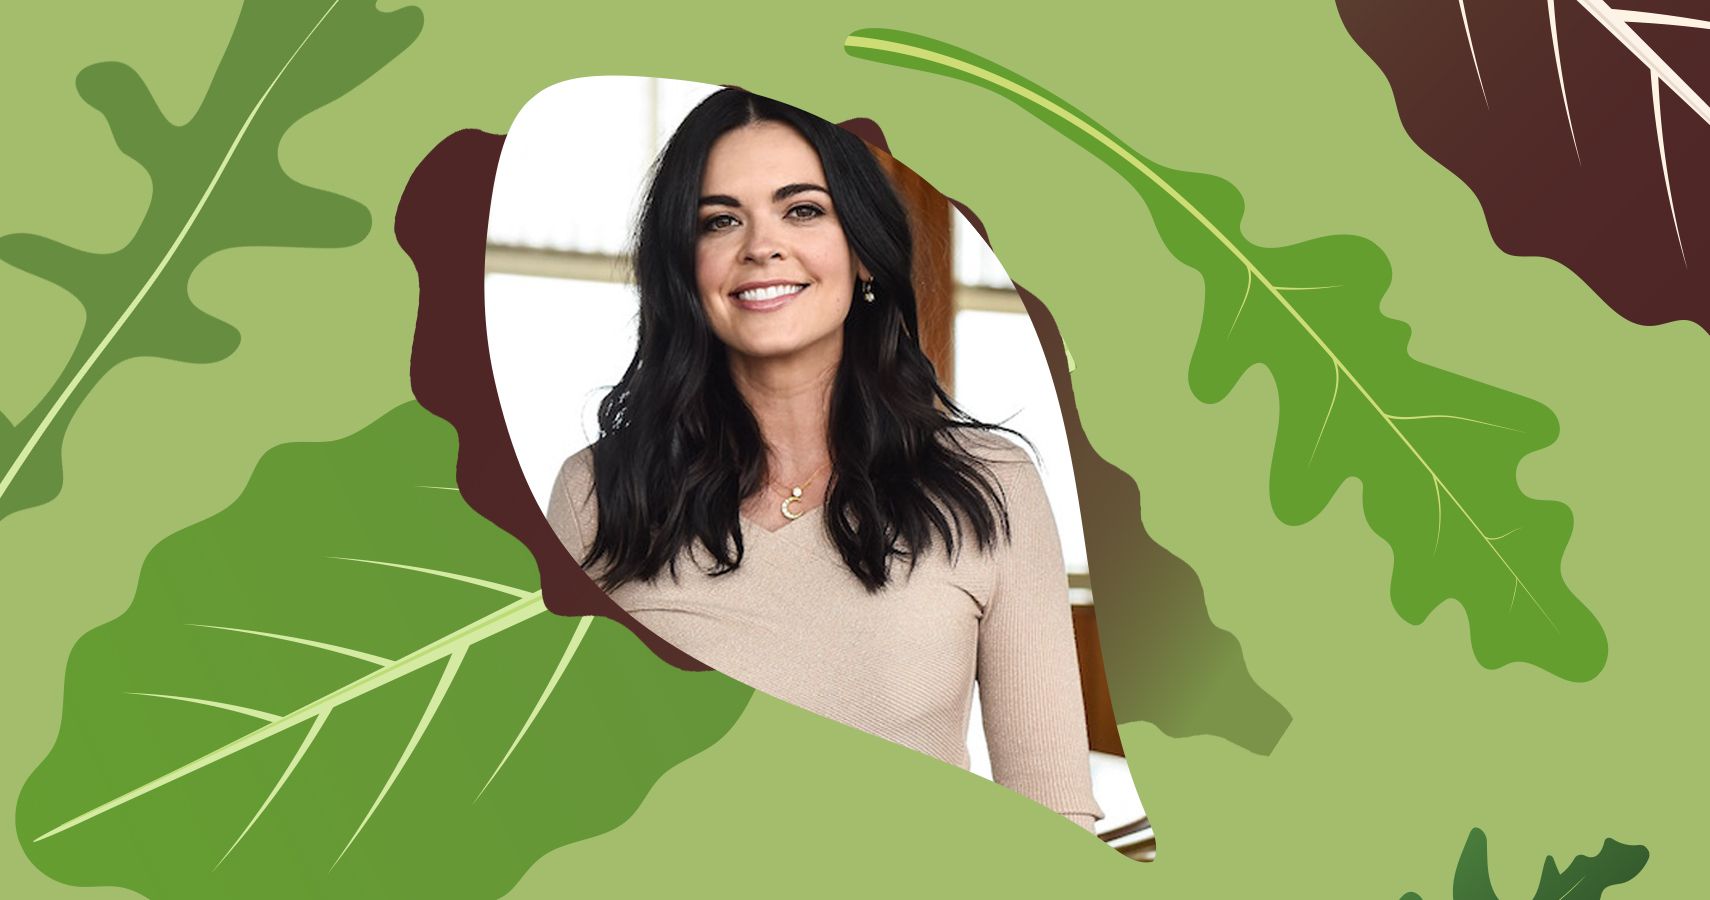 EXCLUSIVE: Celebrity Chef Katie Lee Talks New Baby Plant-Based Food Options